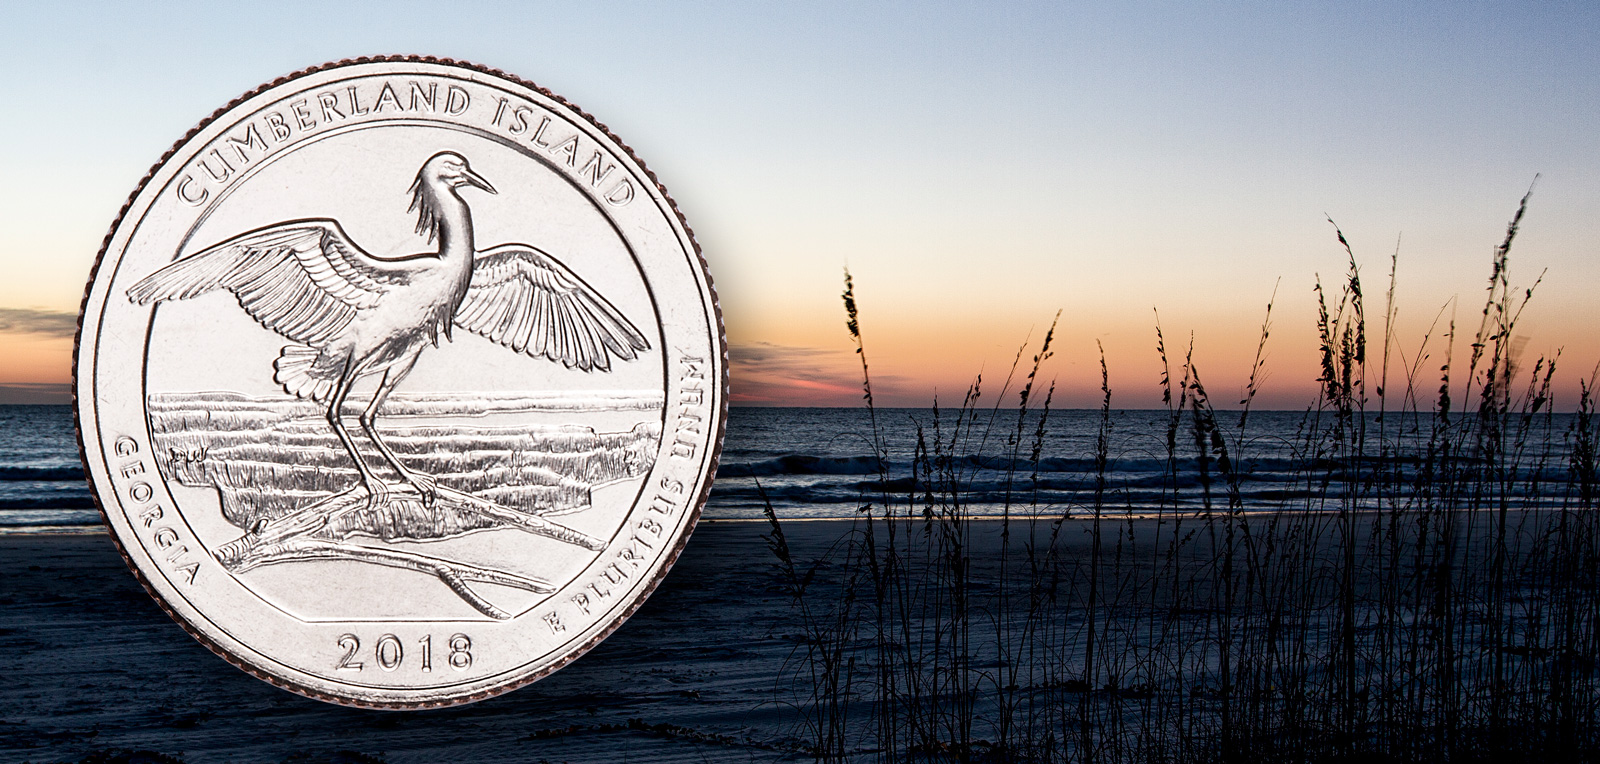 Cumberland Island National Seashore featured on 44th in National Park Quarter series